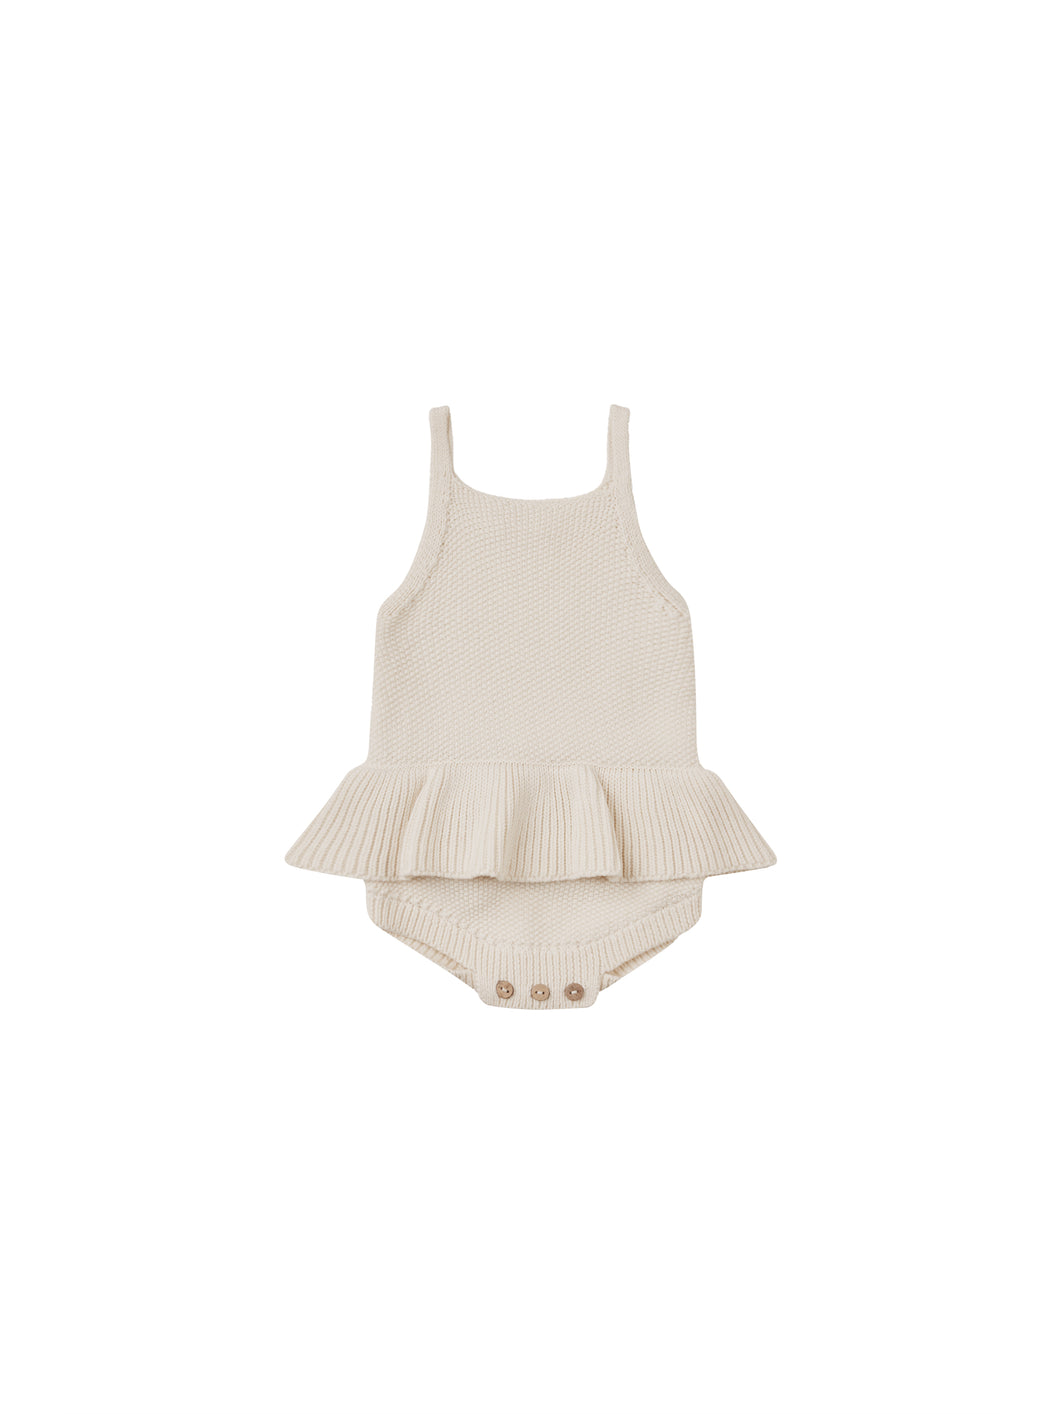 Knit romper with a ruffle waist and tanktop. This romper is featured in a natural colour. 